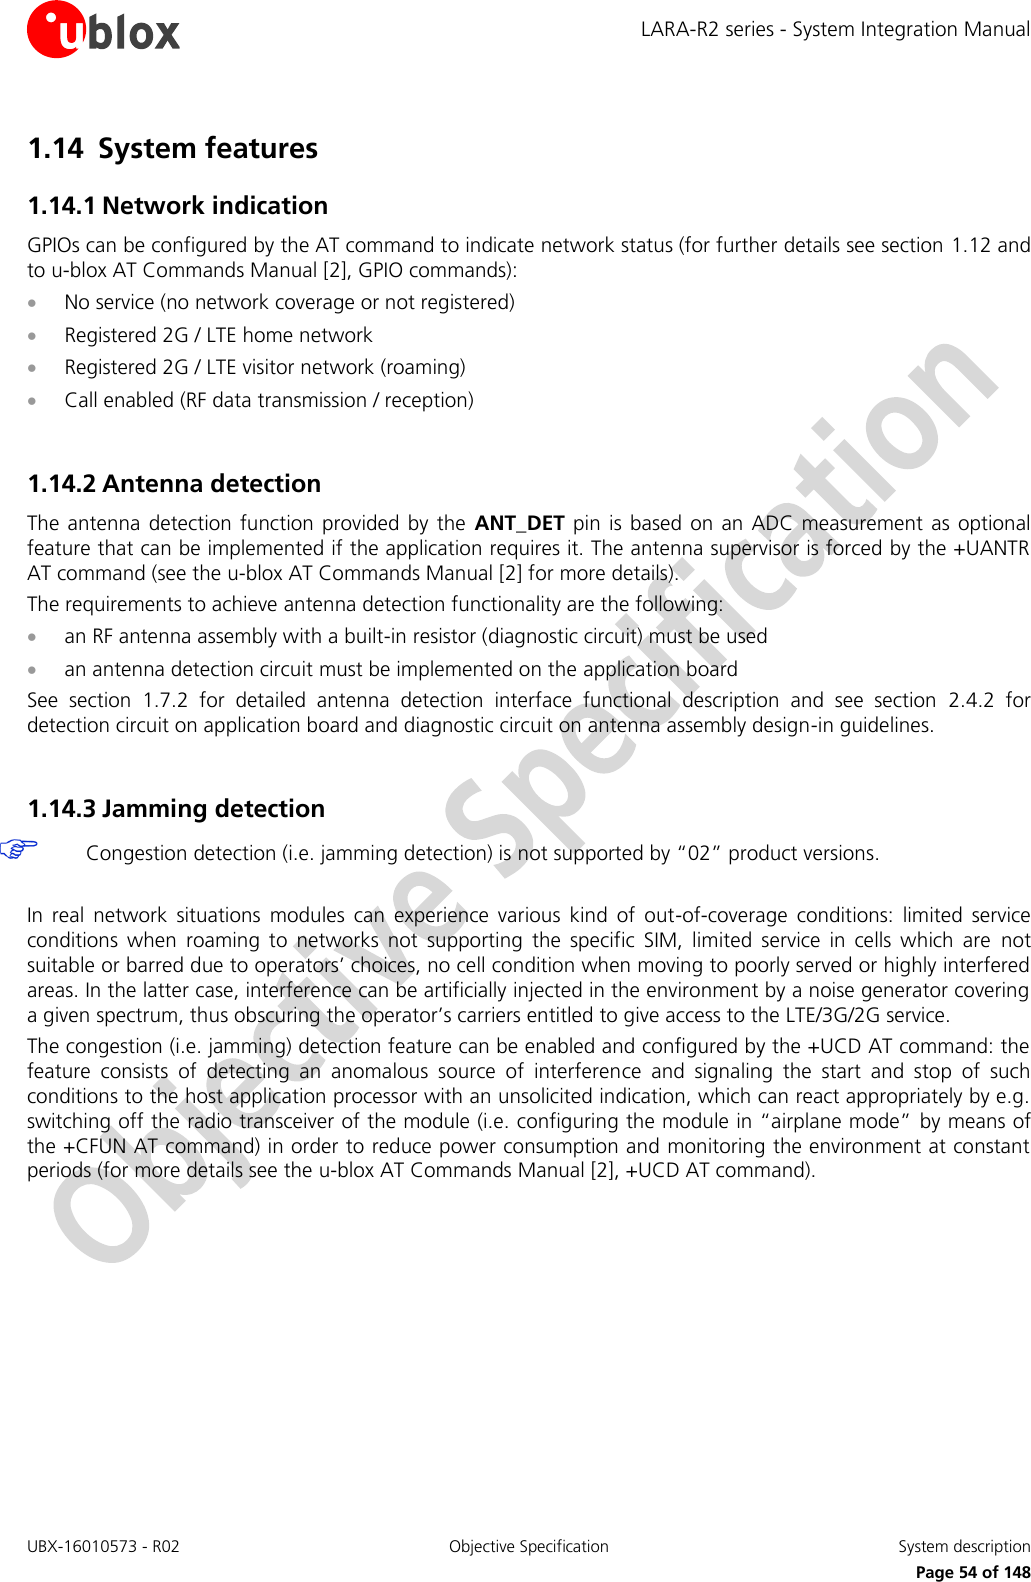 LARA-R2 series - System Integration Manual UBX-16010573 - R02  Objective Specification  System description     Page 54 of 148 1.14 System features 1.14.1 Network indication GPIOs can be configured by the AT command to indicate network status (for further details see section 1.12 and to u-blox AT Commands Manual [2], GPIO commands):  No service (no network coverage or not registered)  Registered 2G / LTE home network  Registered 2G / LTE visitor network (roaming)  Call enabled (RF data transmission / reception)  1.14.2 Antenna detection The  antenna  detection function  provided  by  the  ANT_DET  pin is  based  on  an  ADC  measurement  as optional feature that can be implemented if the application requires it. The antenna supervisor is forced by the +UANTR AT command (see the u-blox AT Commands Manual [2] for more details). The requirements to achieve antenna detection functionality are the following:  an RF antenna assembly with a built-in resistor (diagnostic circuit) must be used  an antenna detection circuit must be implemented on the application board See  section  1.7.2  for  detailed  antenna  detection  interface  functional  description  and  see  section  2.4.2  for detection circuit on application board and diagnostic circuit on antenna assembly design-in guidelines.  1.14.3 Jamming detection  Congestion detection (i.e. jamming detection) is not supported by “02” product versions.  In  real  network  situations  modules  can  experience  various  kind  of  out-of-coverage  conditions:  limited  service conditions  when  roaming  to  networks  not  supporting  the  specific  SIM,  limited  service  in  cells  which  are  not suitable or barred due to operators’ choices, no cell condition when moving to poorly served or highly interfered areas. In the latter case, interference can be artificially injected in the environment by a noise generator covering a given spectrum, thus obscuring the operator’s carriers entitled to give access to the LTE/3G/2G service. The congestion (i.e. jamming) detection feature can be enabled and configured by the +UCD AT command: the feature  consists  of  detecting  an  anomalous  source  of  interference  and  signaling  the  start  and  stop  of  such conditions to the host application processor with an unsolicited indication, which can react appropriately by e.g. switching off the radio transceiver of the module (i.e. configuring the module in “airplane mode” by means of the +CFUN AT command) in order to reduce power consumption and monitoring the environment at constant periods (for more details see the u-blox AT Commands Manual [2], +UCD AT command).  